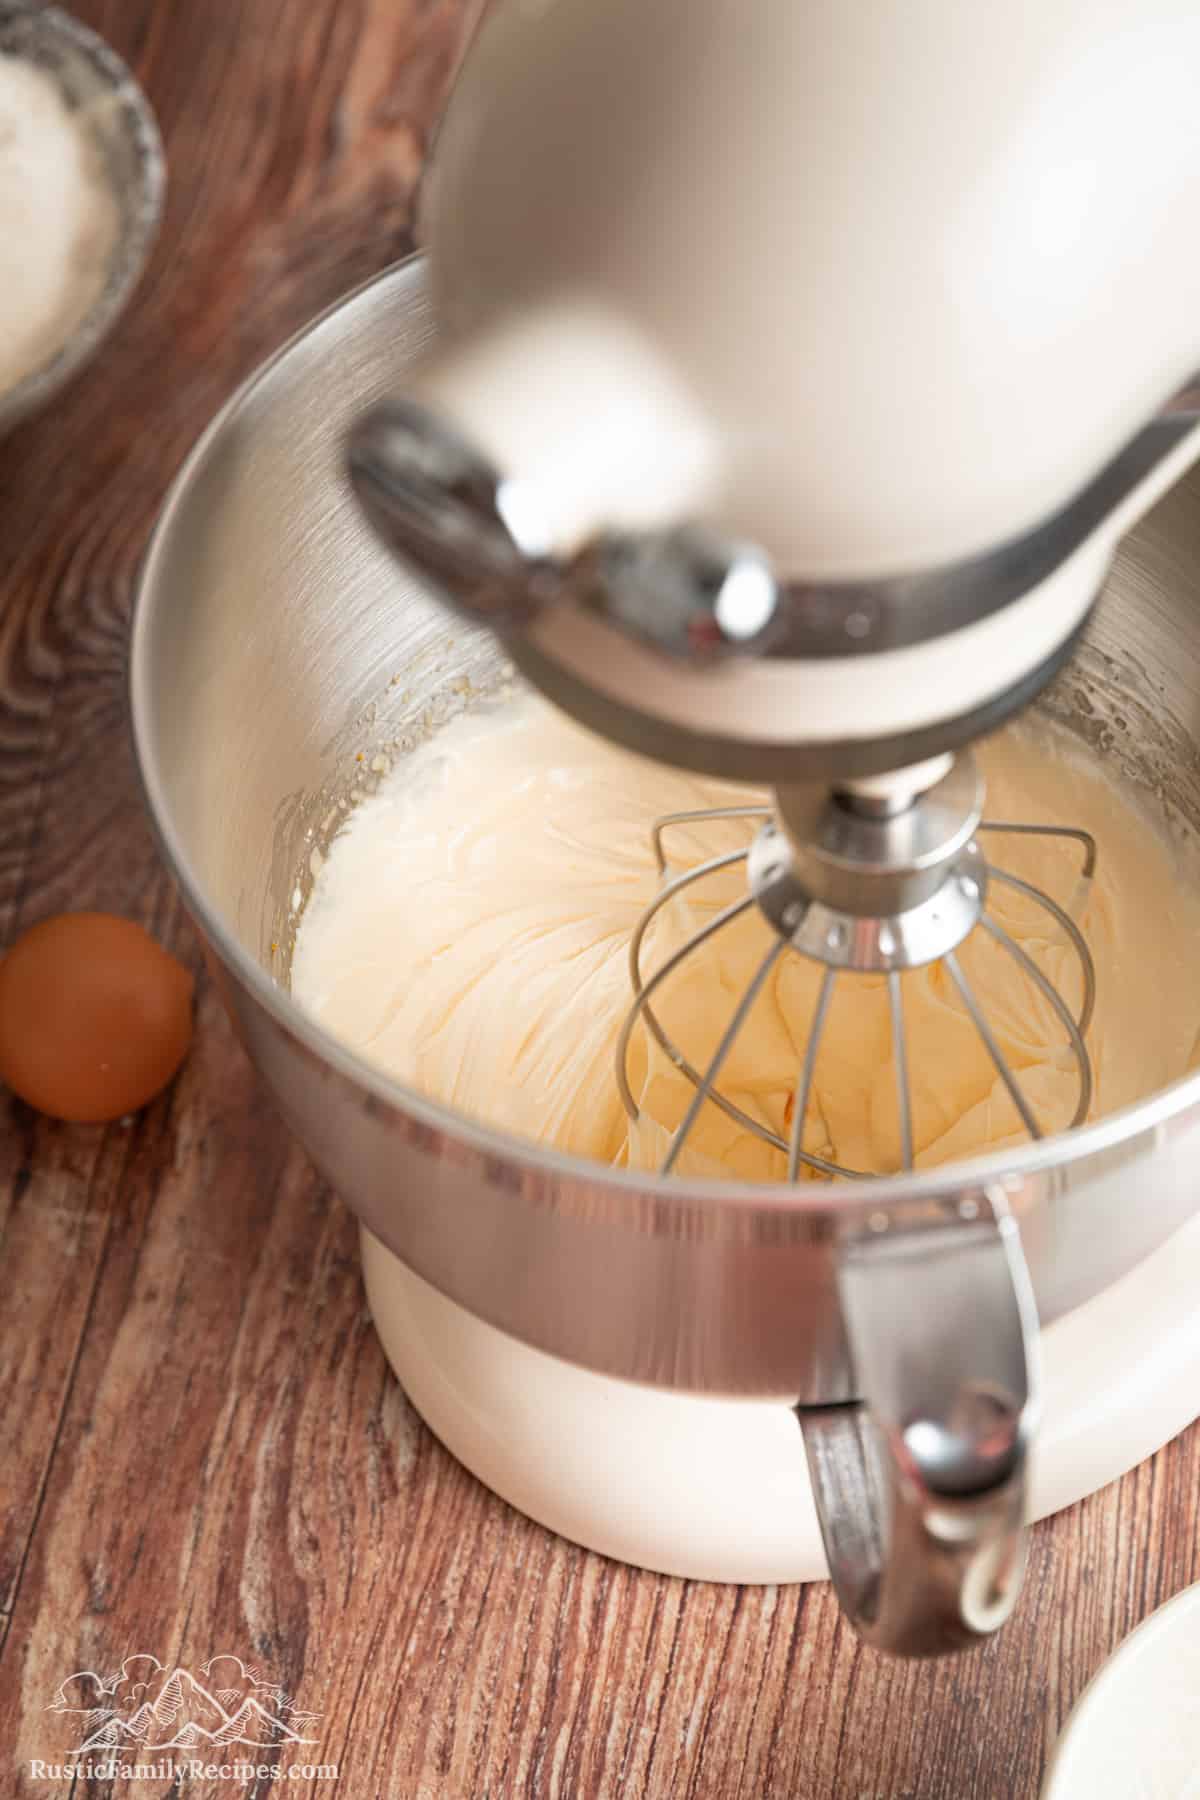 Sugar and eggs being beat in a stand mixer